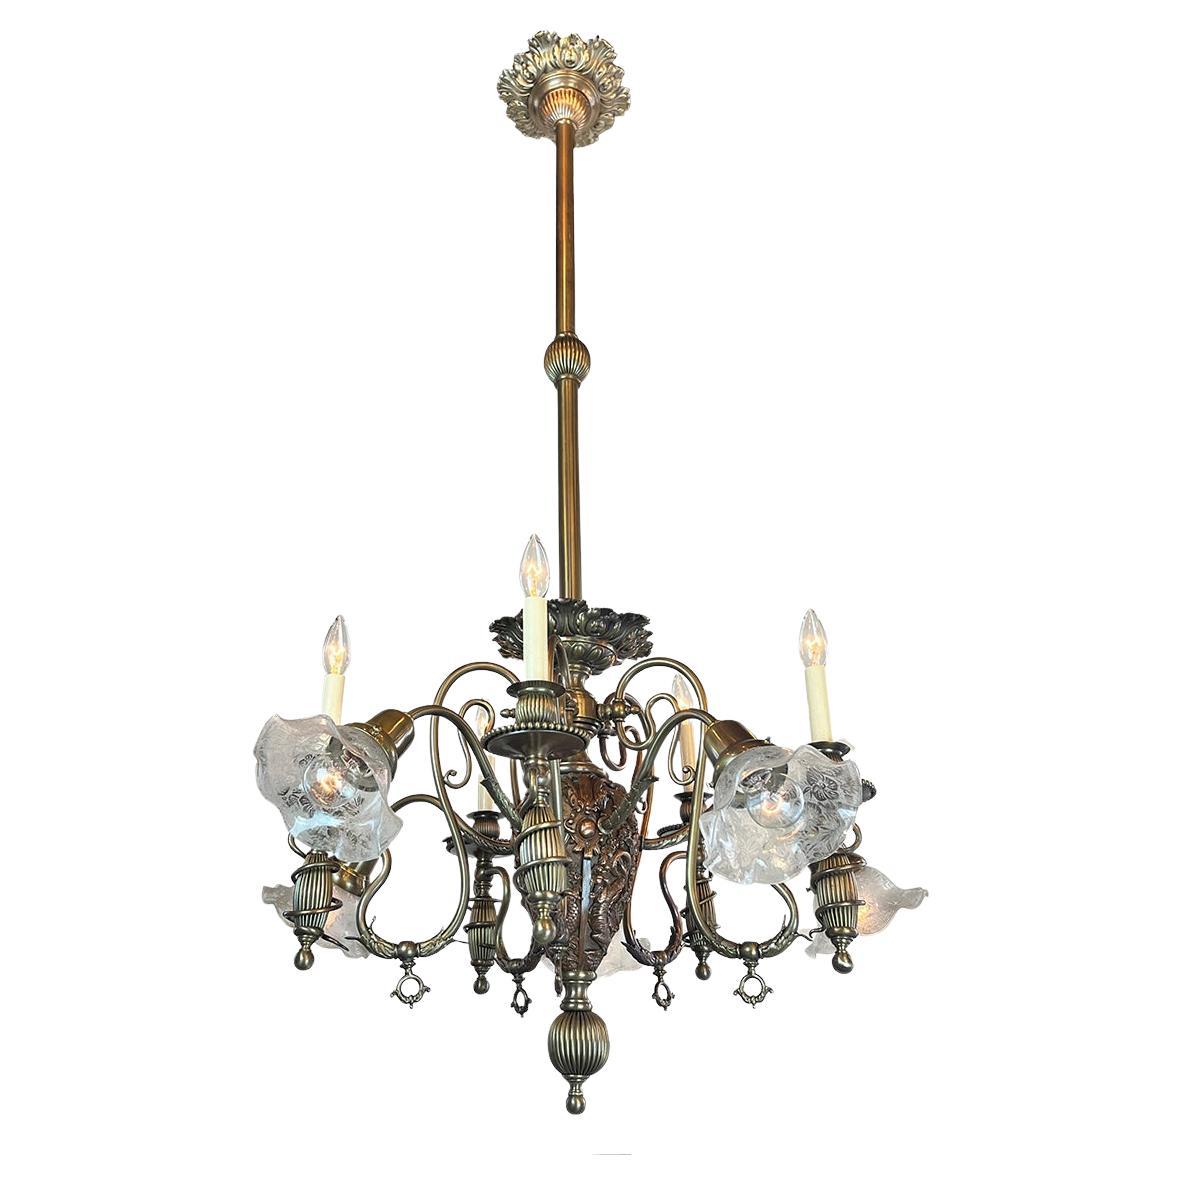 1887 Aesthetic Movement Combination Gas Electric Chandelier 